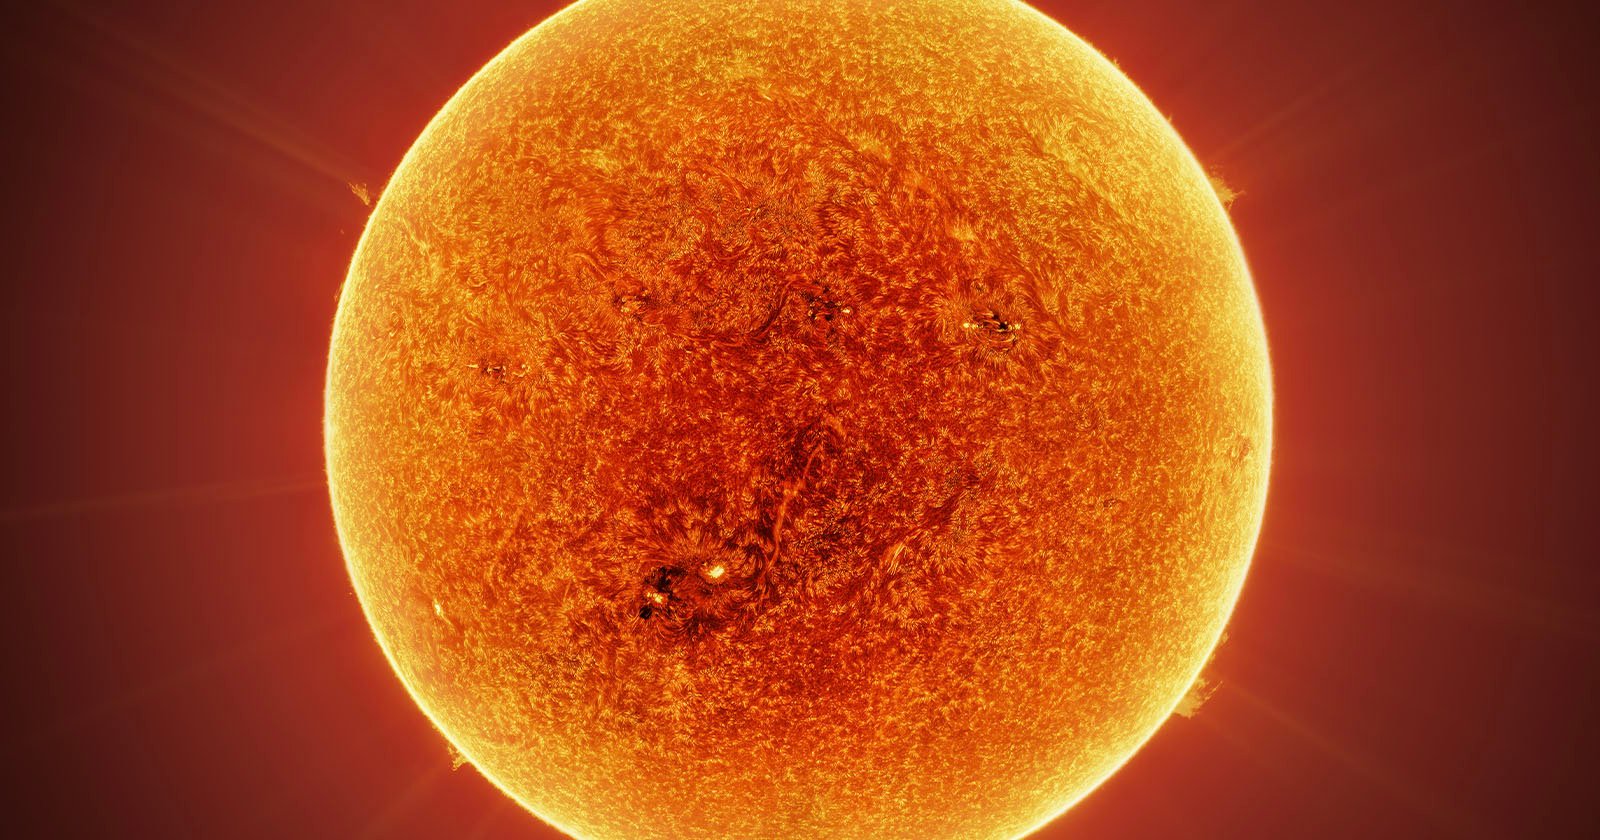 High resolution image of the sun